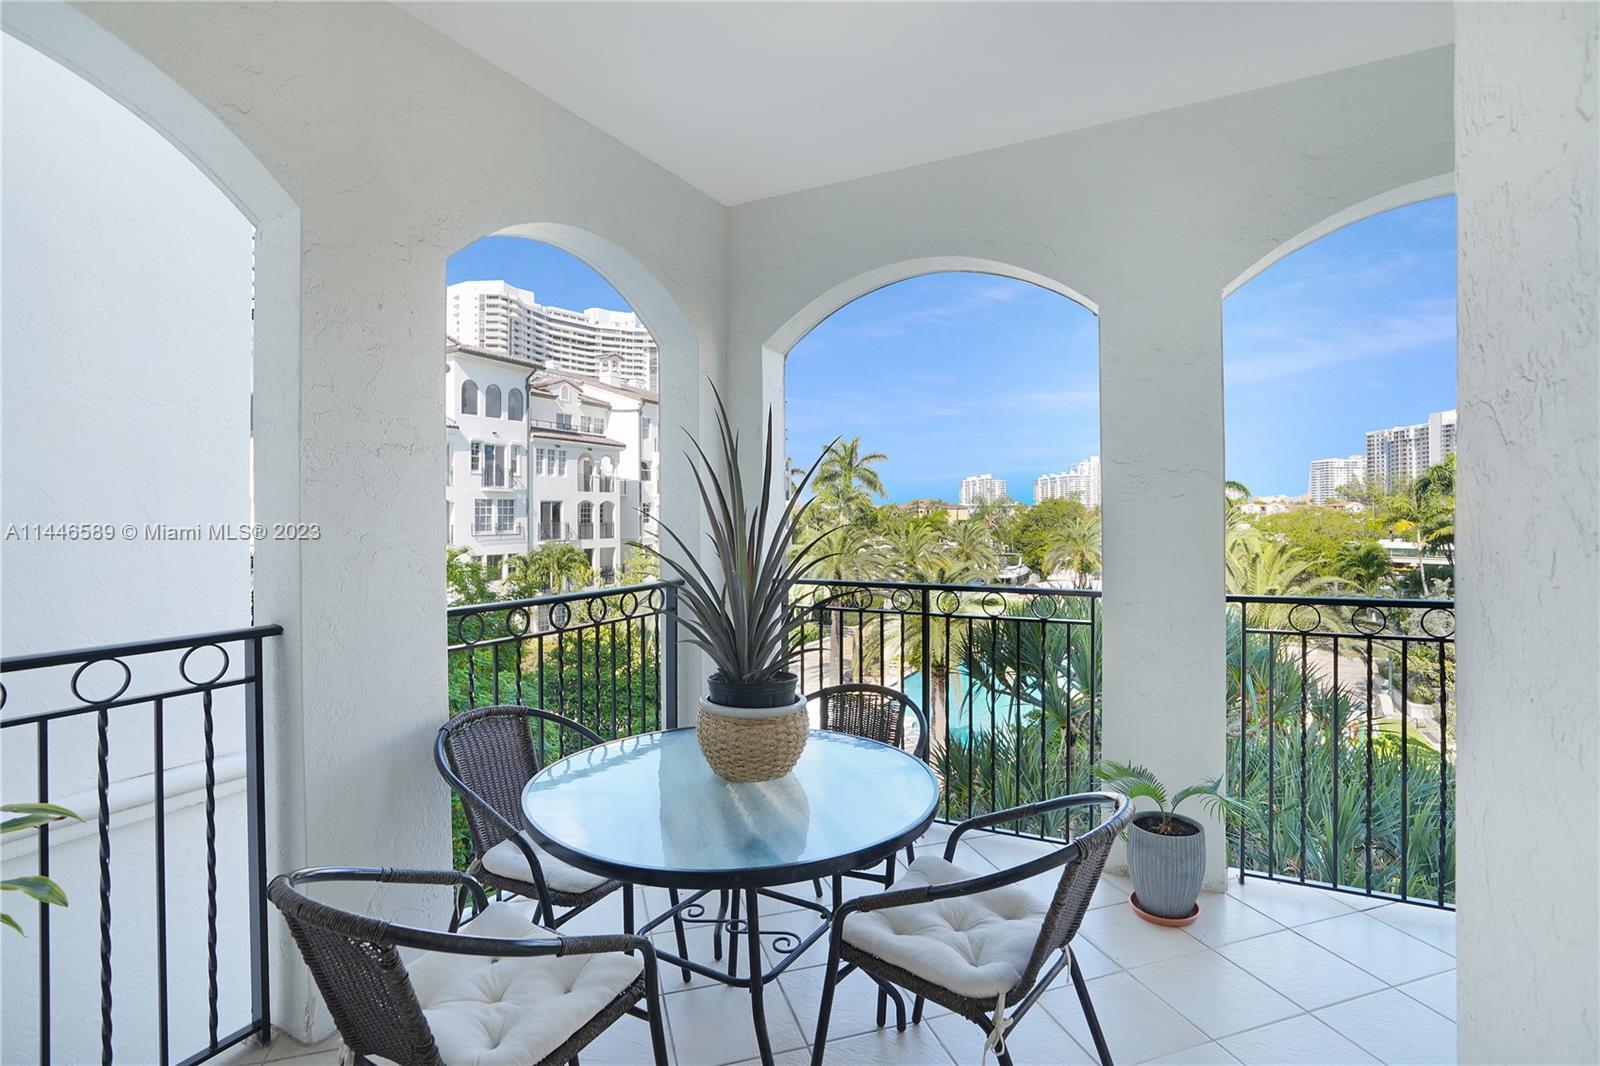 Experience the Williams Island lifestyle from this 3BR/2BA unit in the Mediterranean Village. This 3